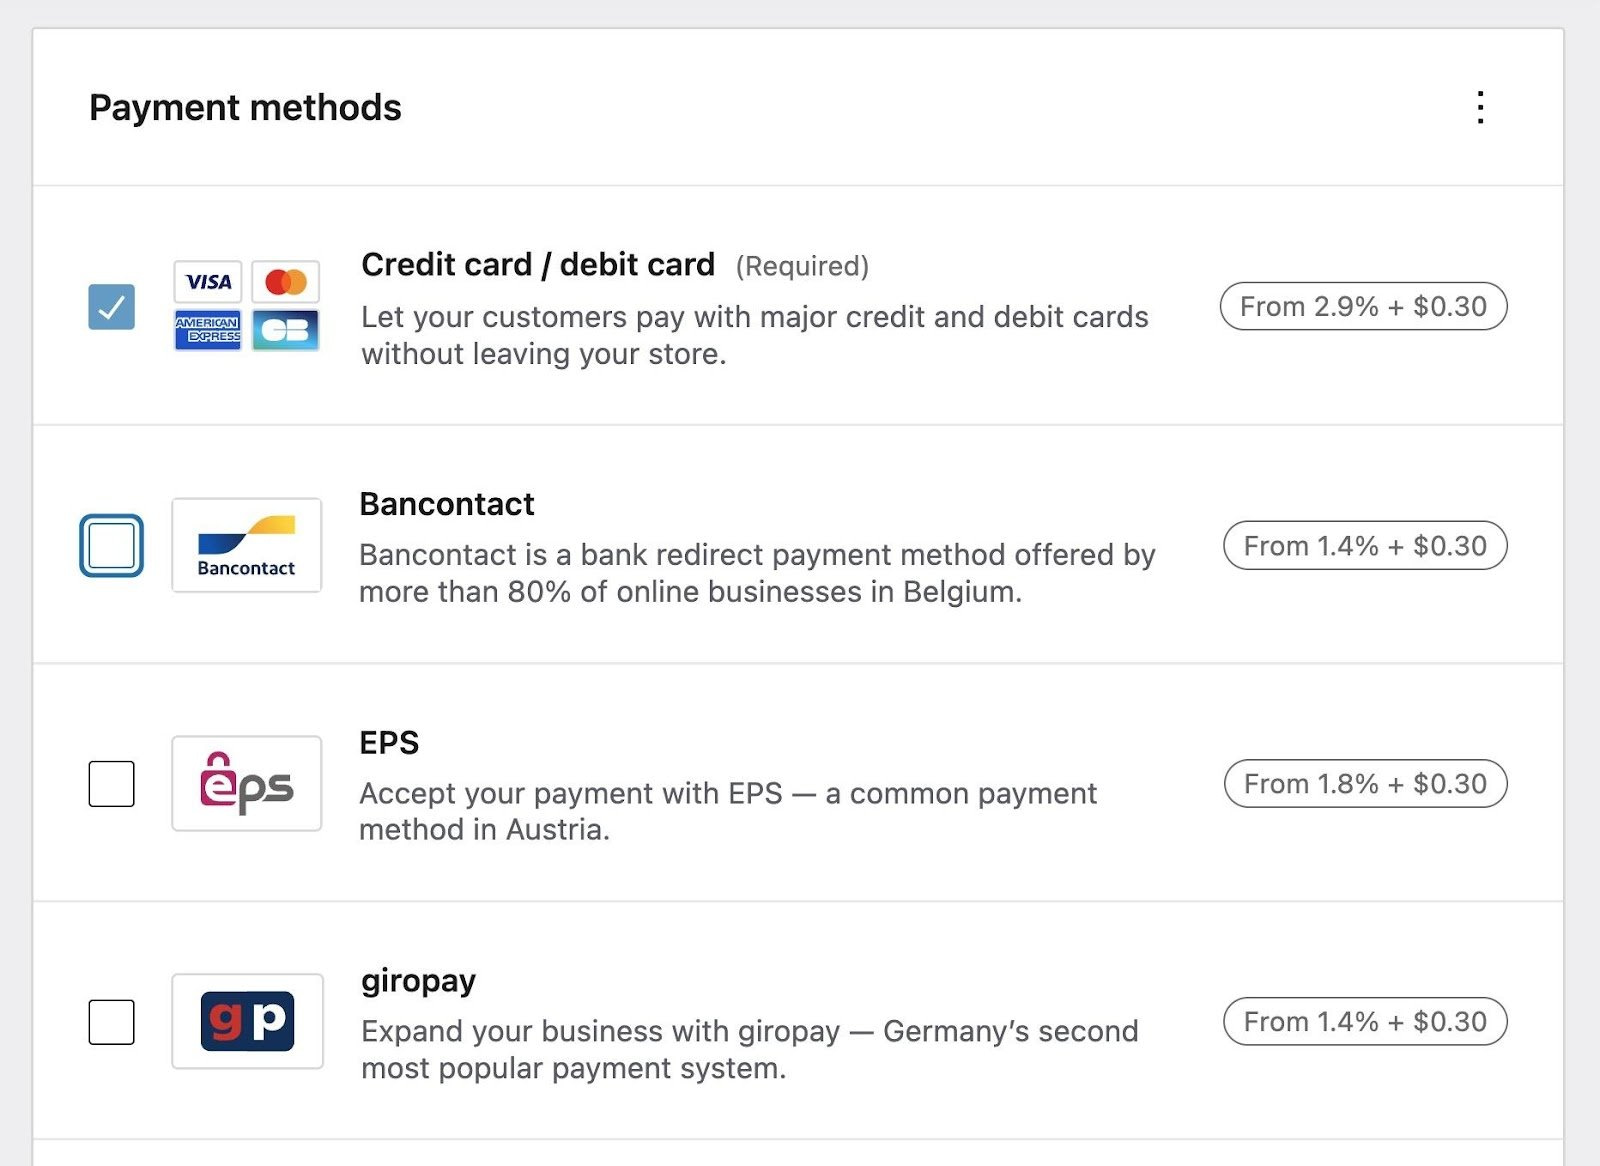 Adding new payment methods.